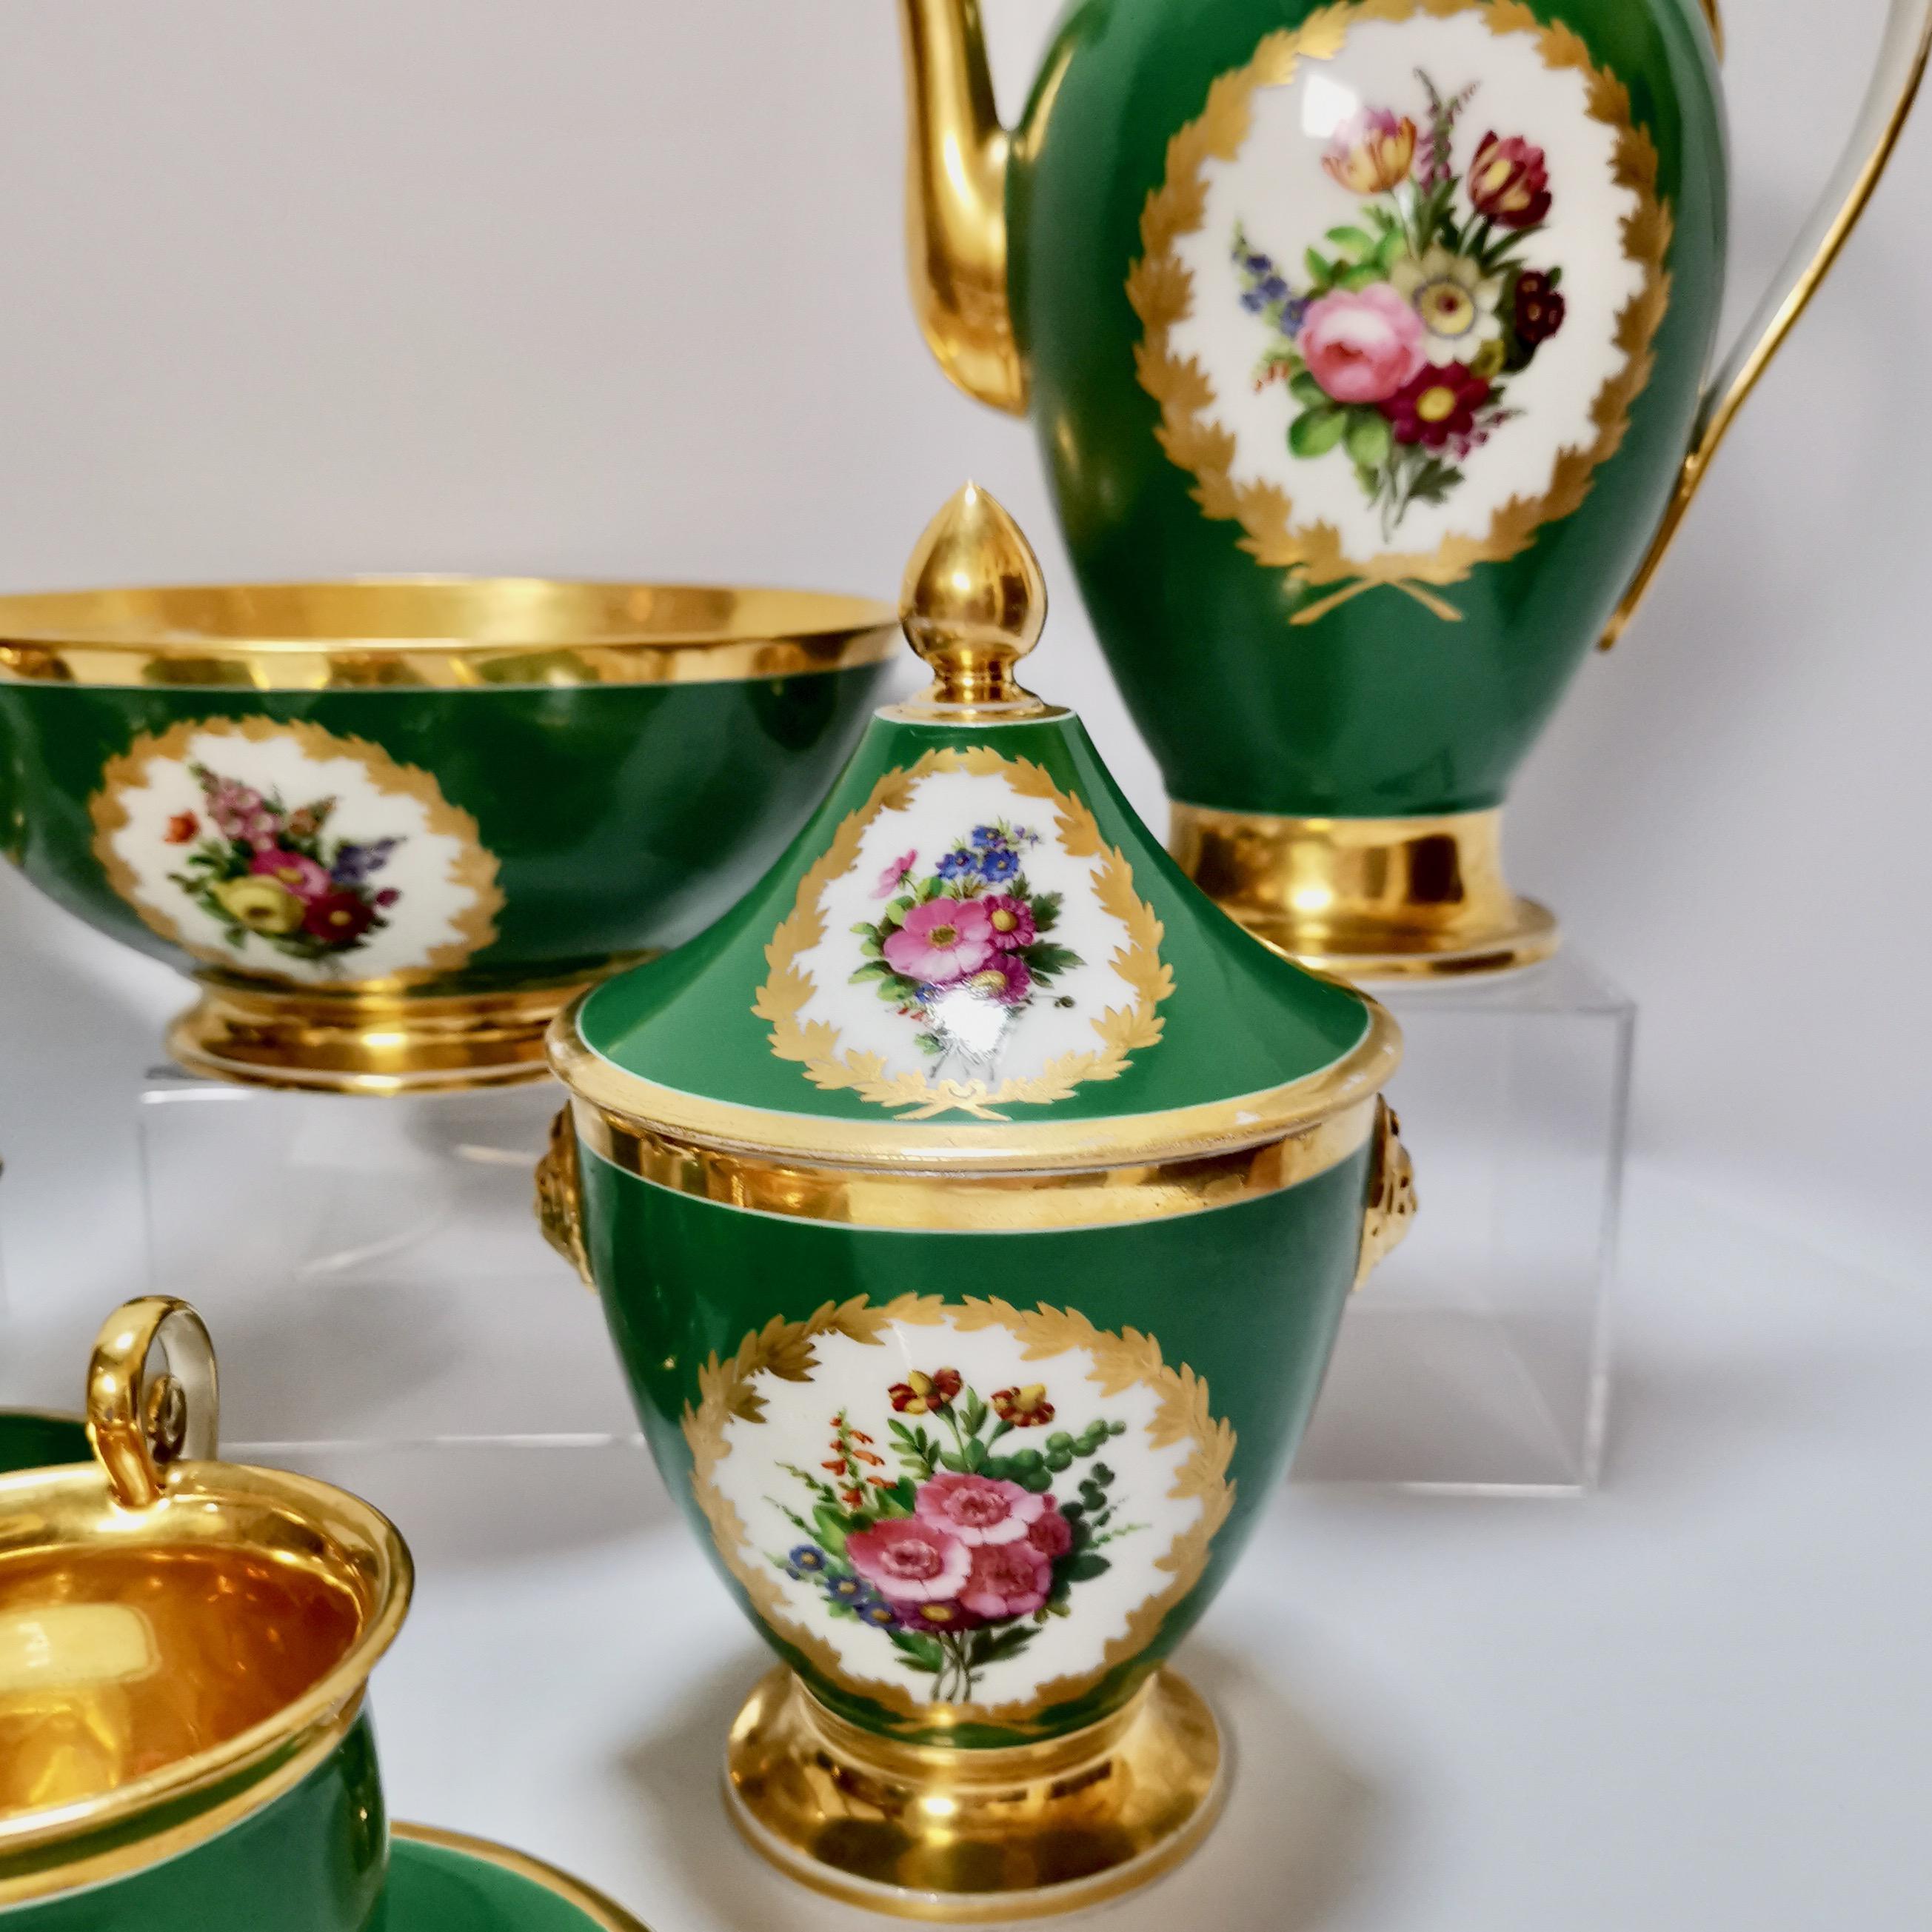 Hand-Painted Paris Porcelain Coffee Service, Emerald Green and Floral, Empire Style ca 1820